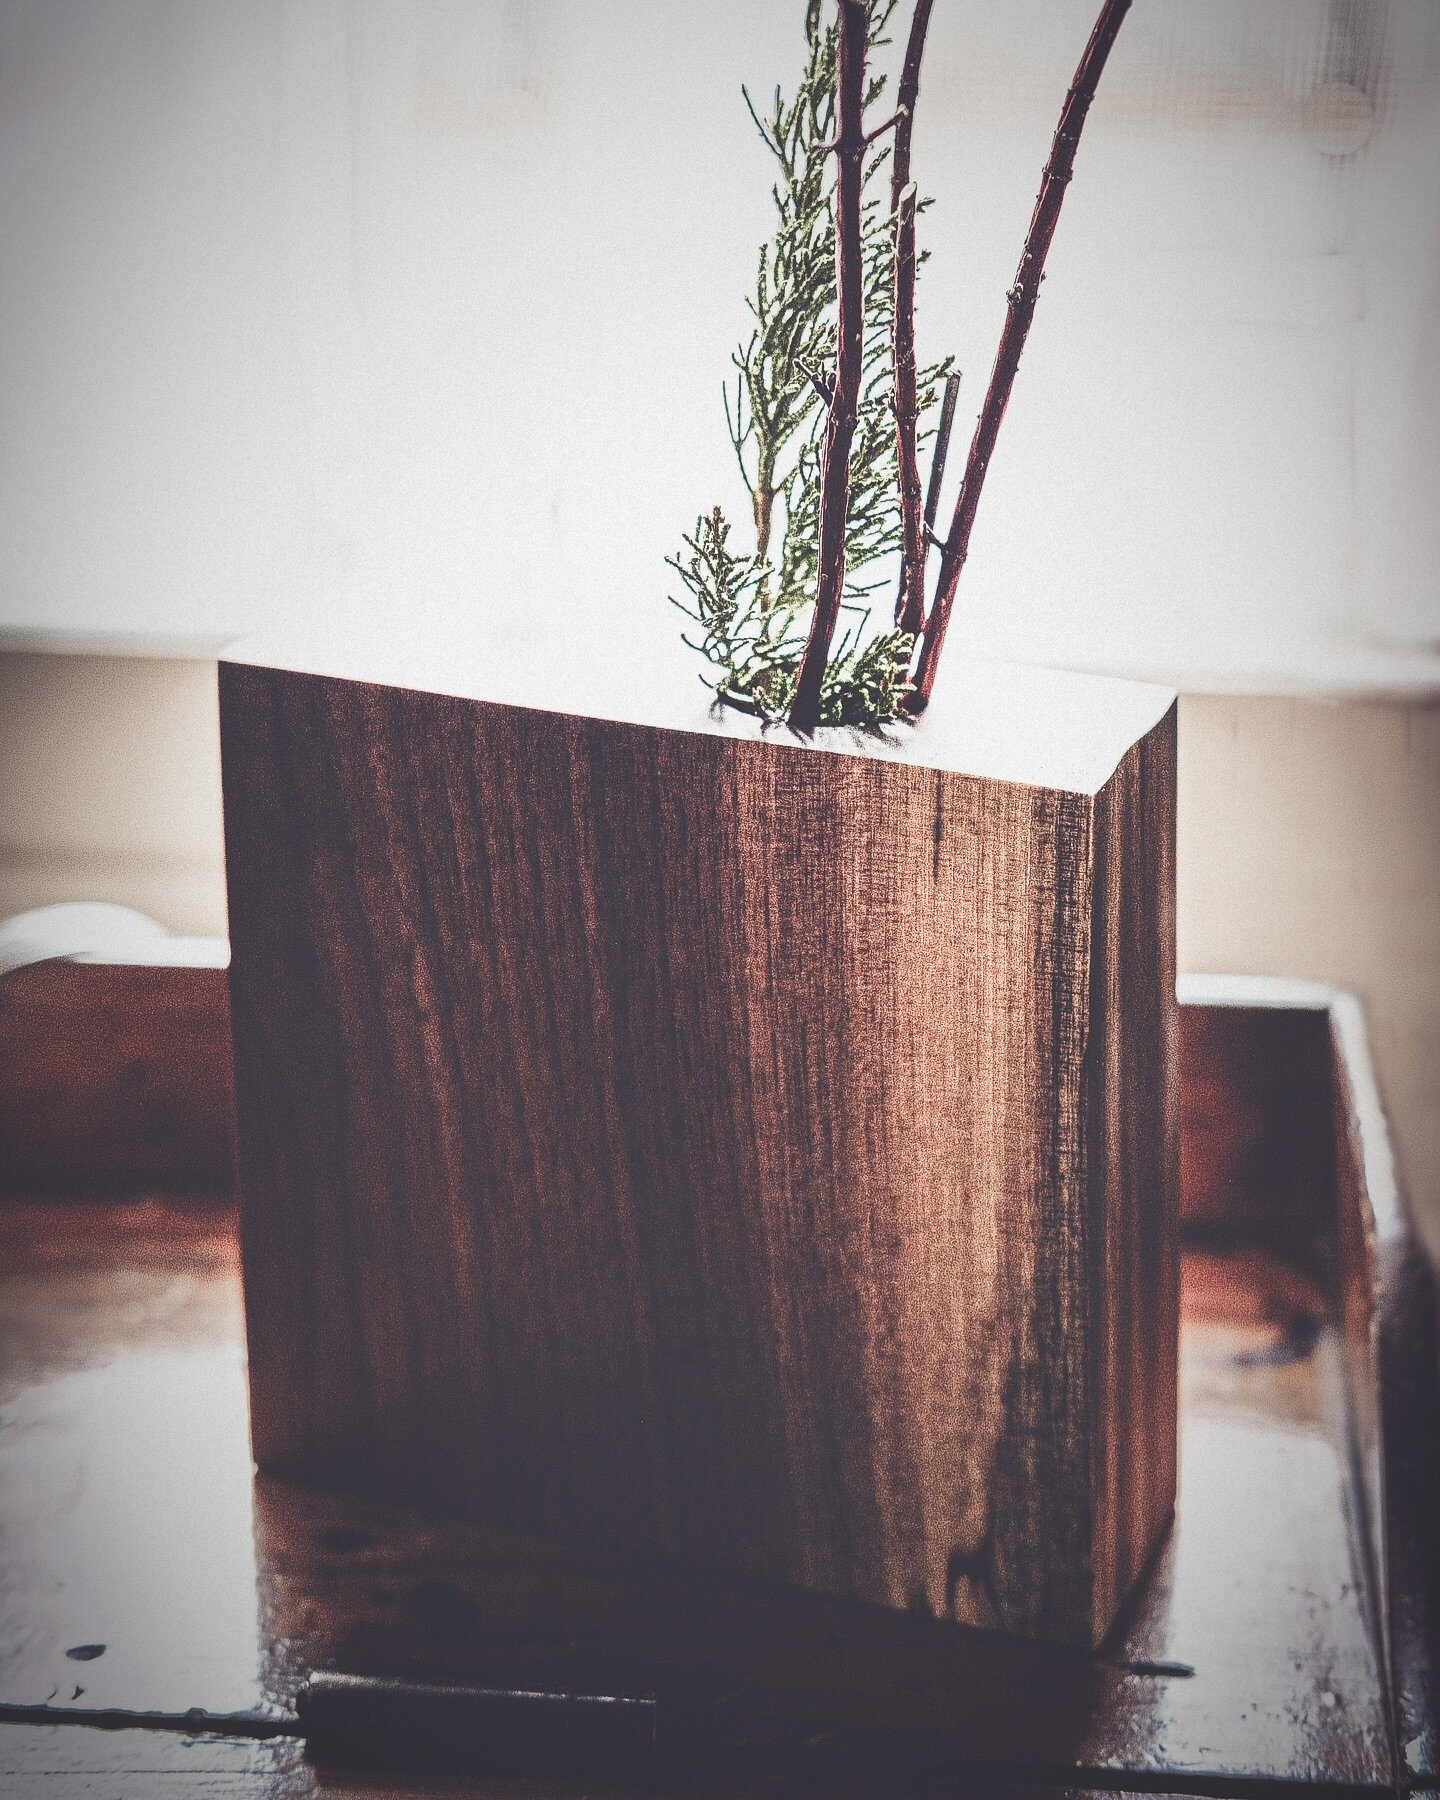 Handmade vase with just a sprig and a branch from the woods.  My favorite kind of gift.  Simply made with love.